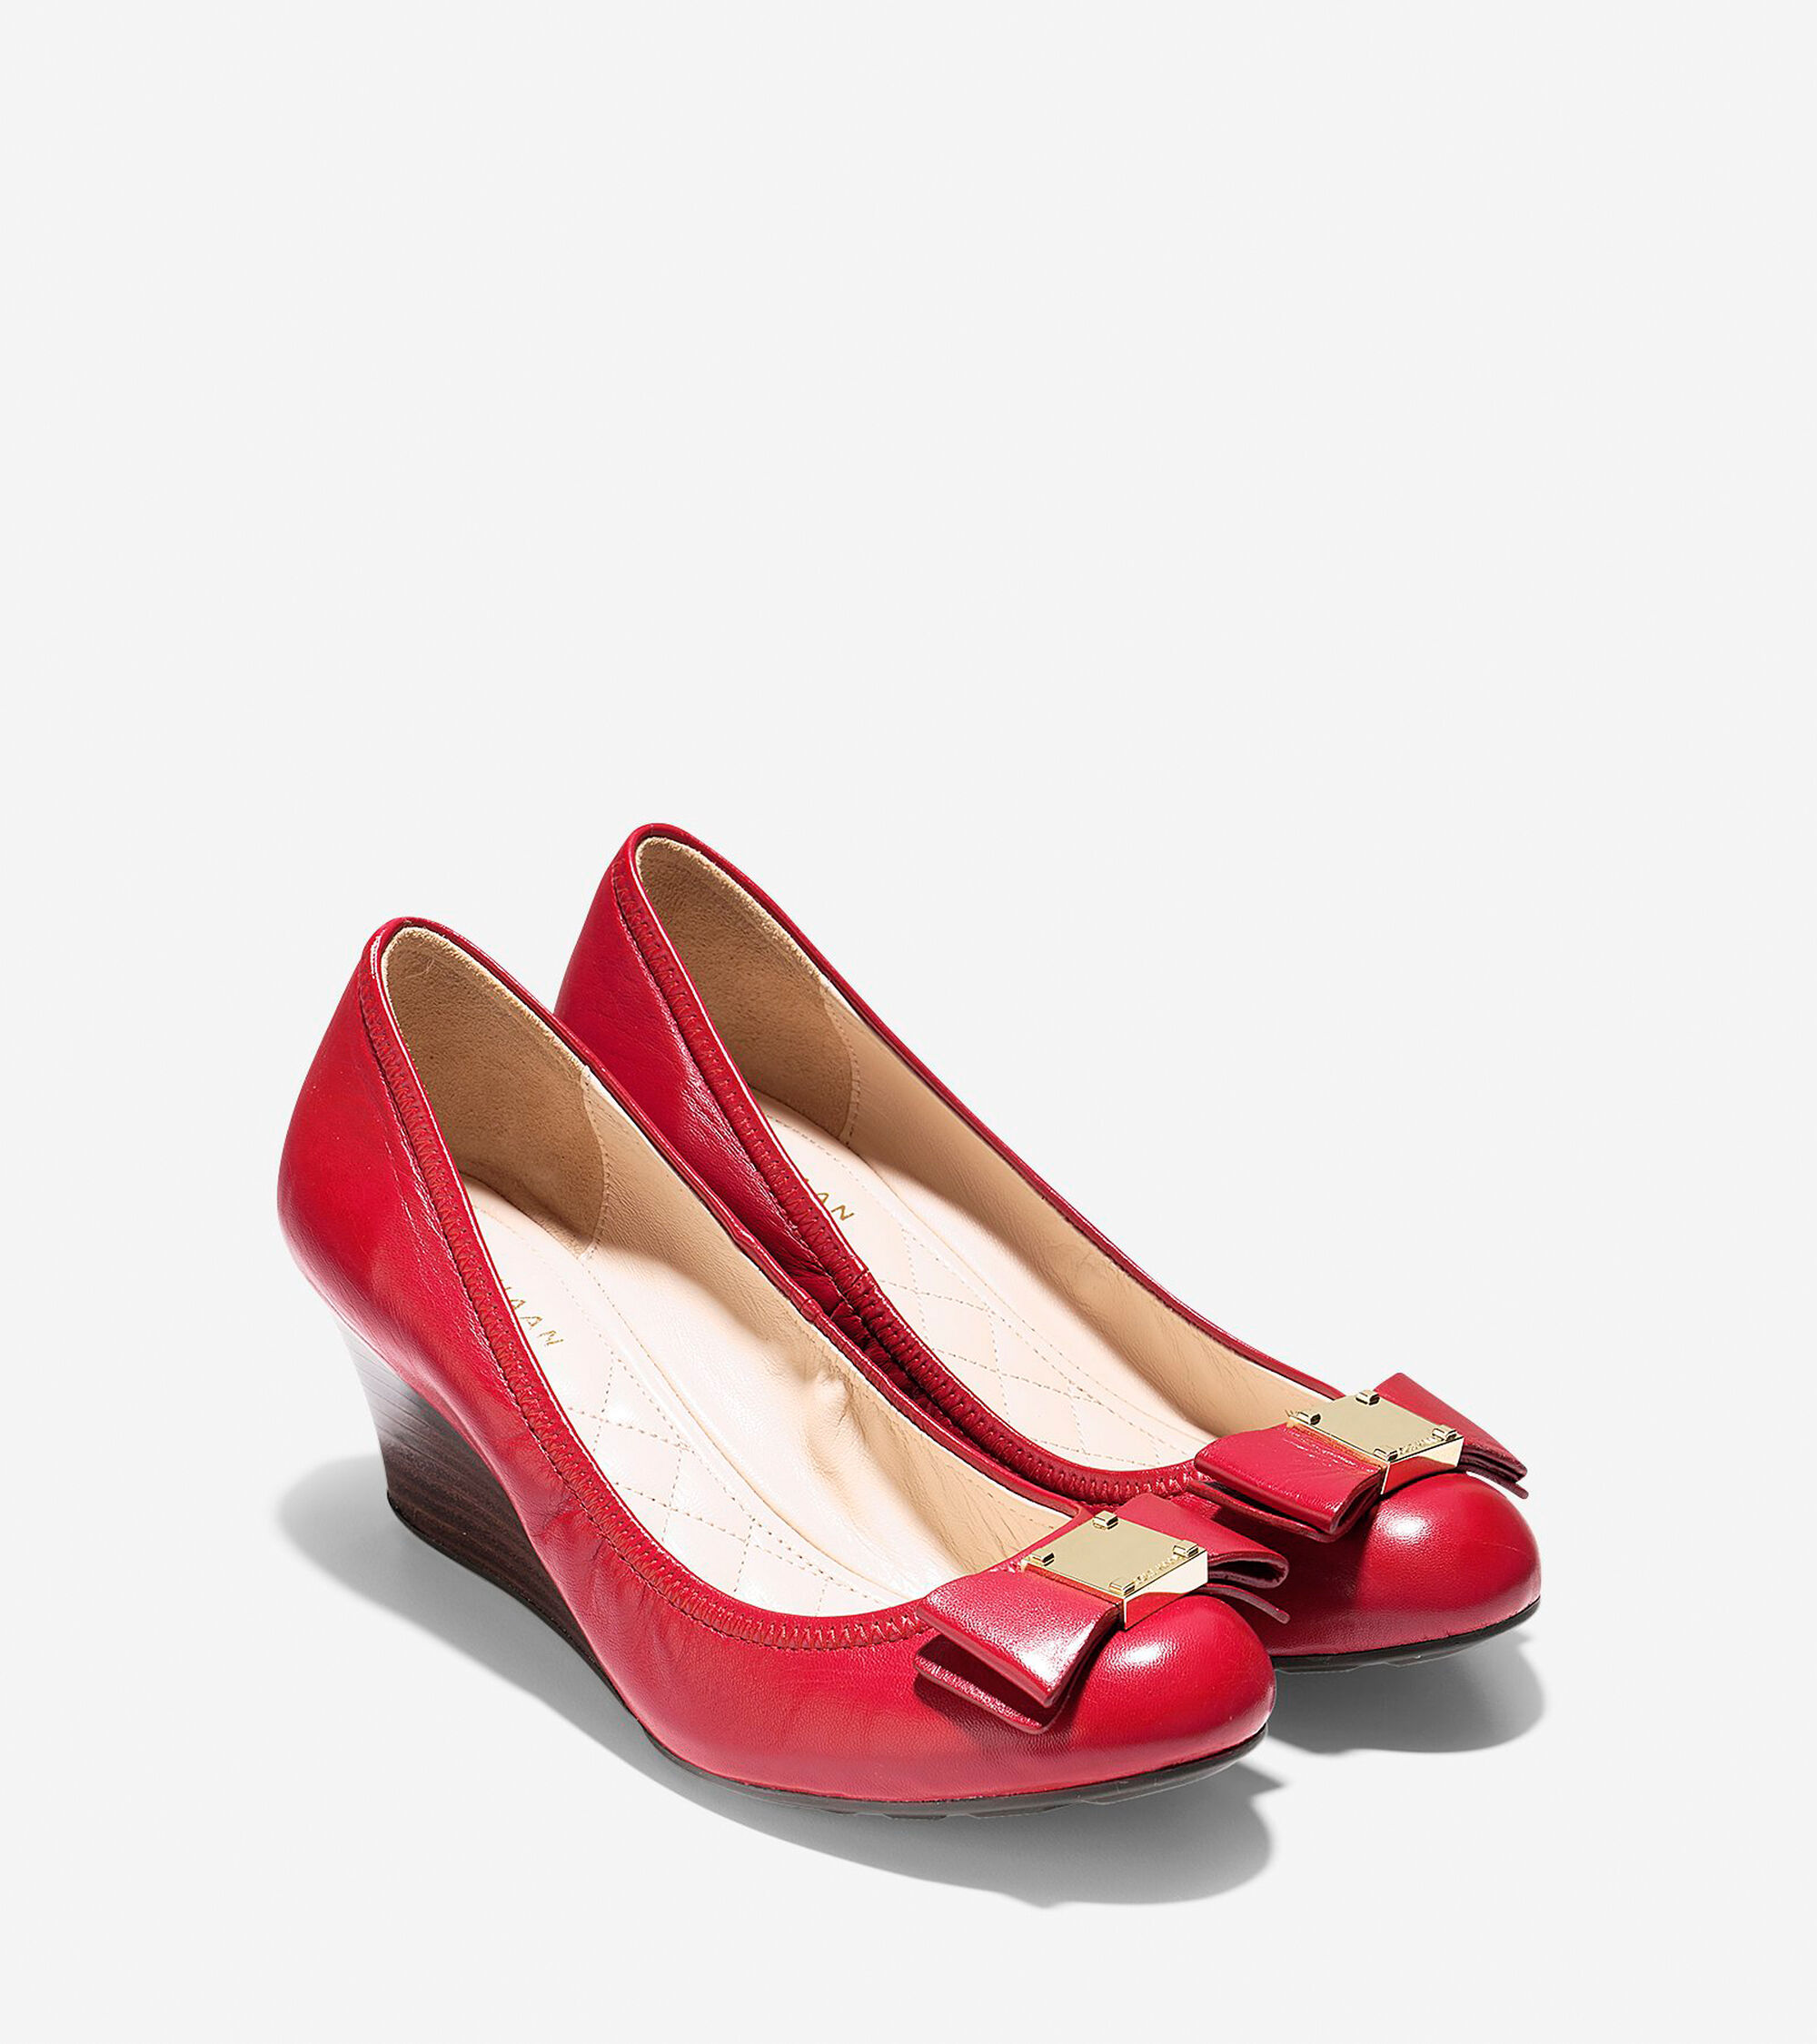 Tali Grand Bow Wedges 65mm in Tango Red | Cole Haan